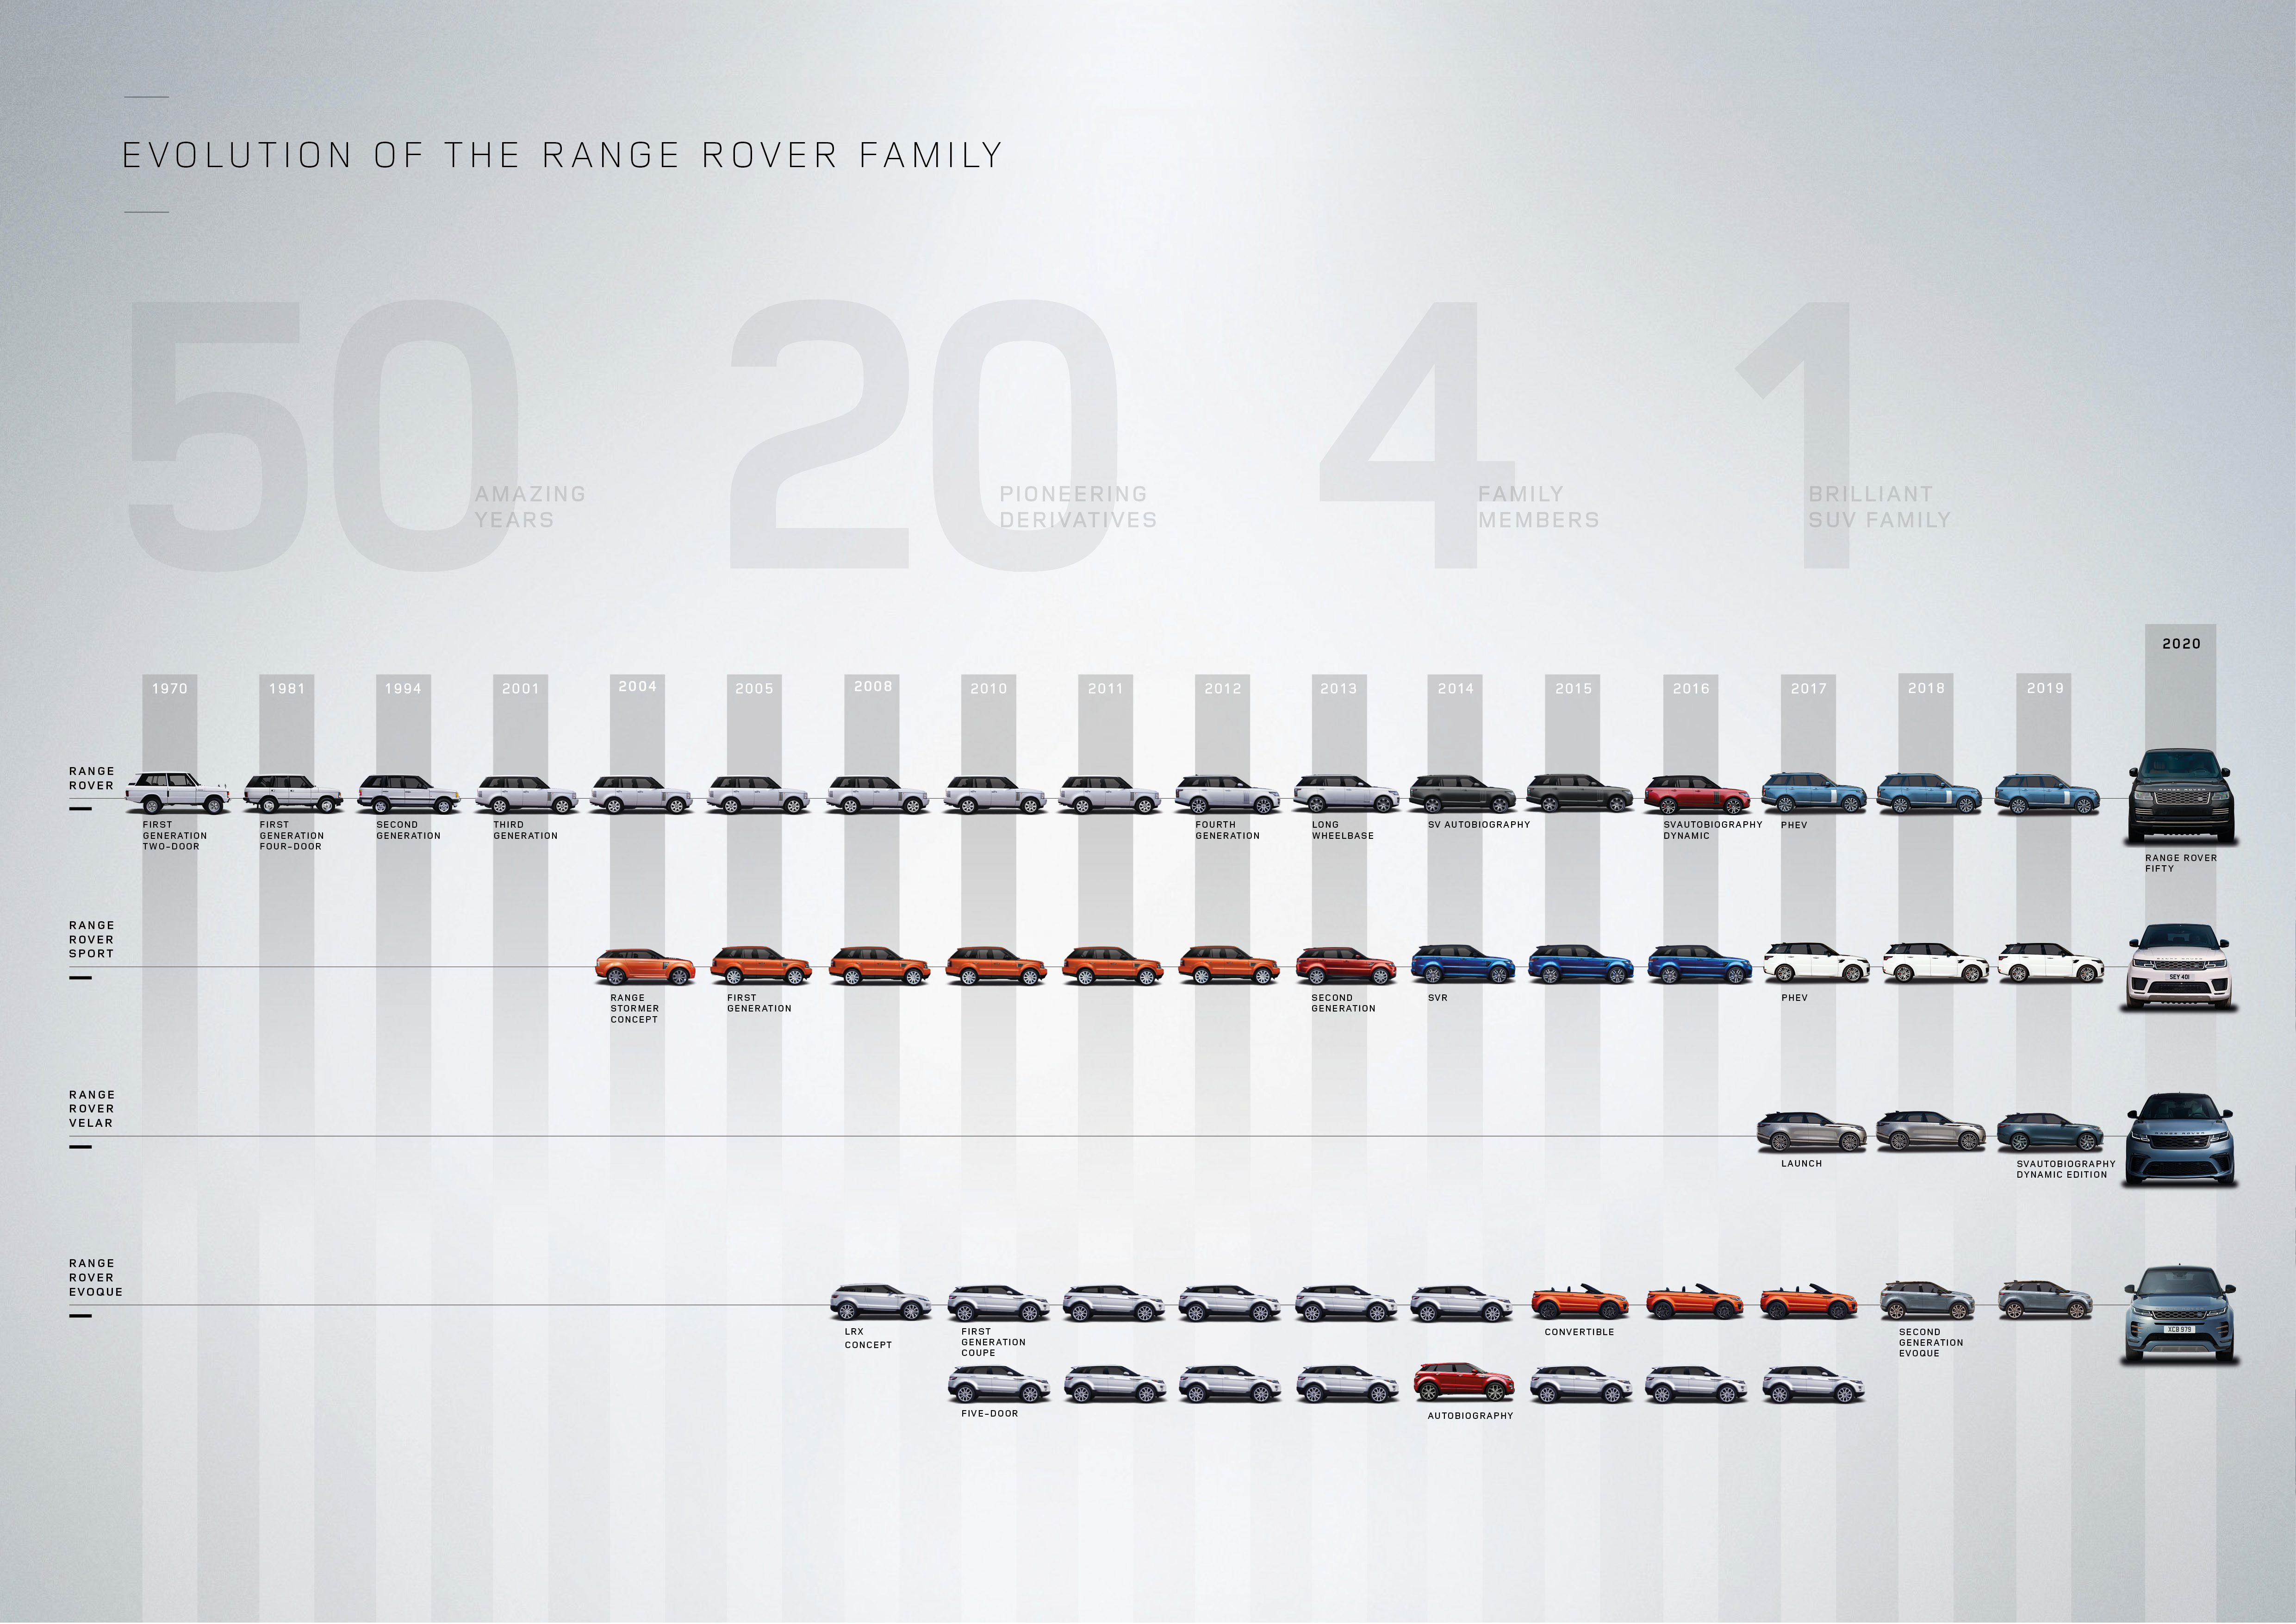 50 Years of Range Rover - vehicle timeline history